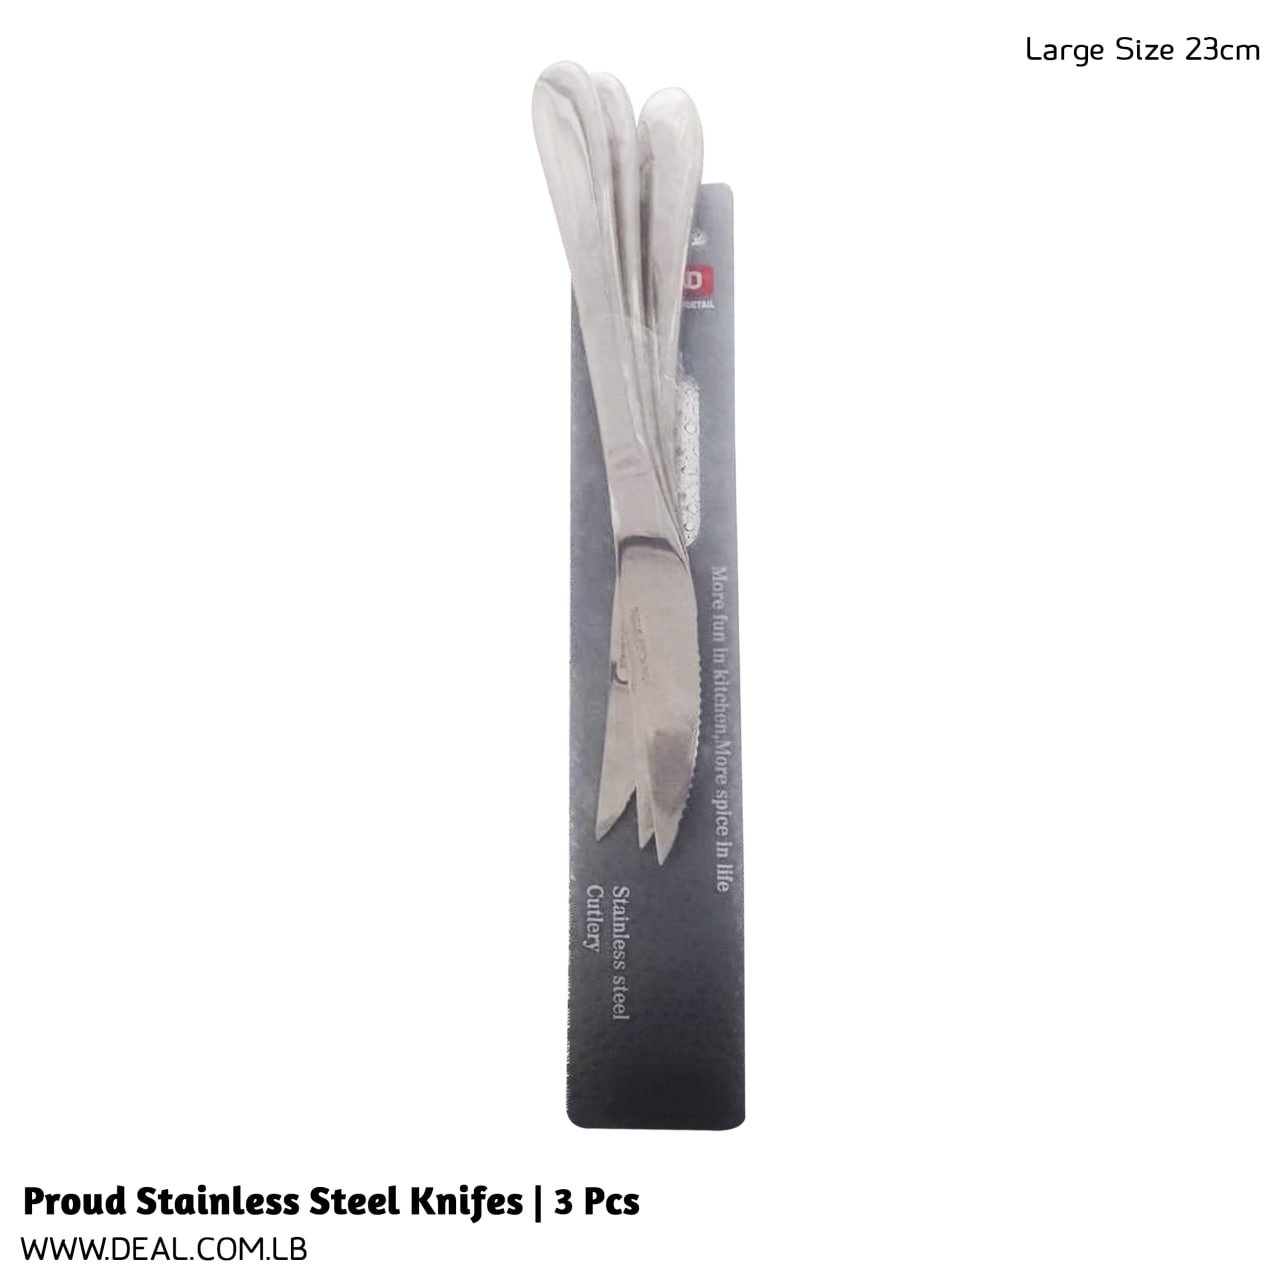 Proud Stainless Steel Knifes | 3 Pcs